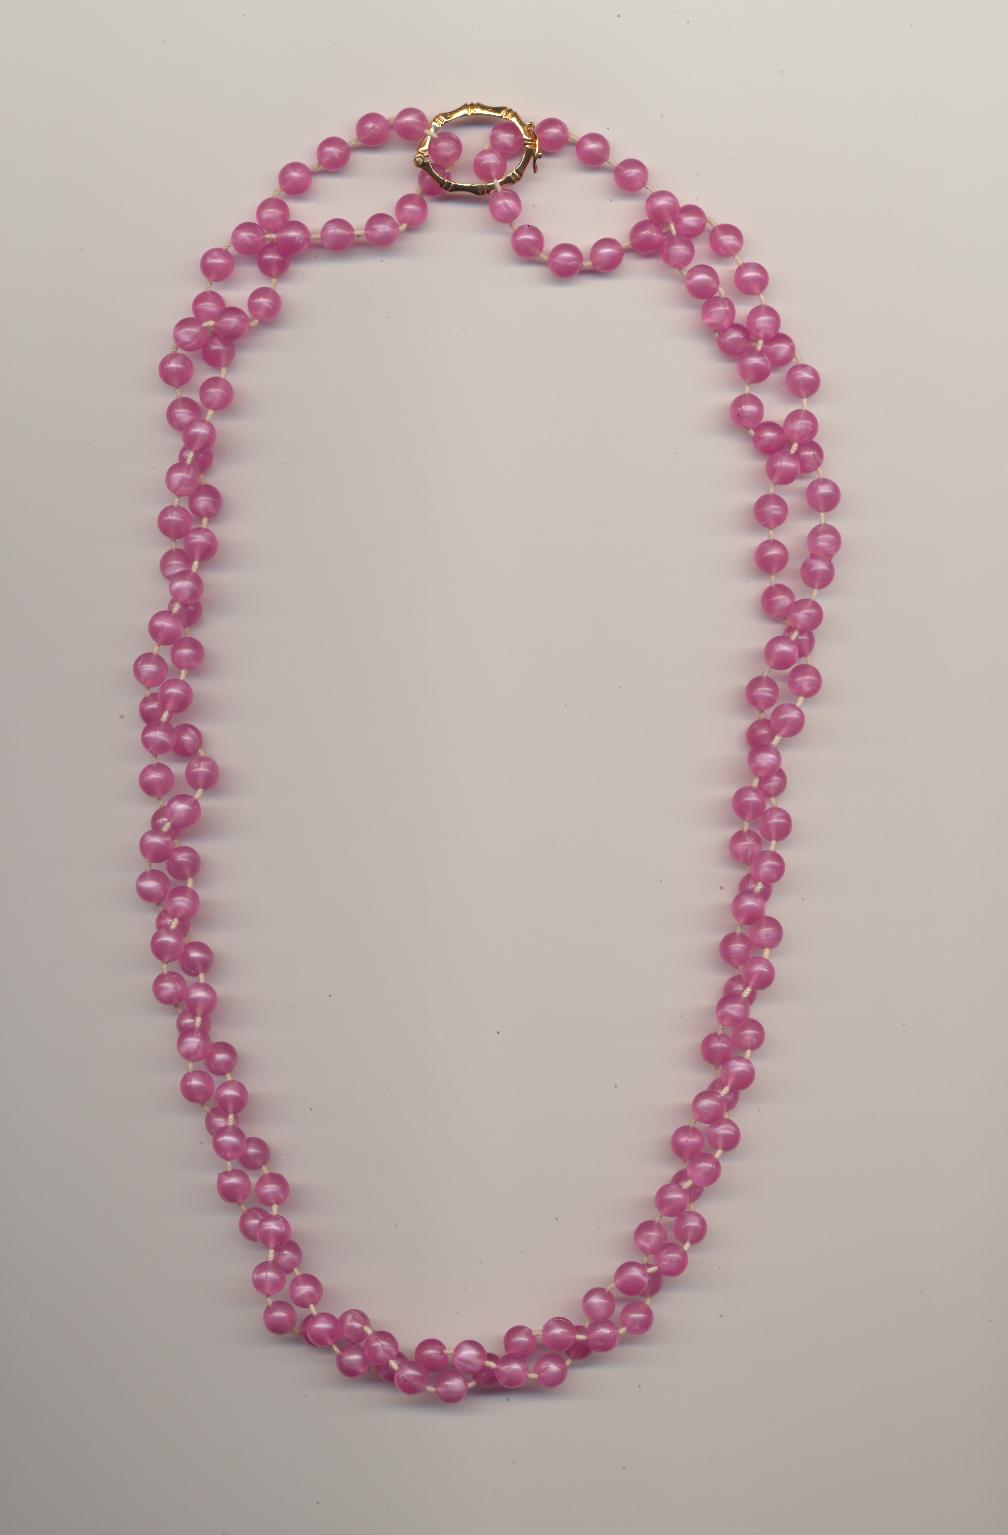 A Twisted Double Strand Bead Necklace Made Of One Necklace And A Pearl Shortener